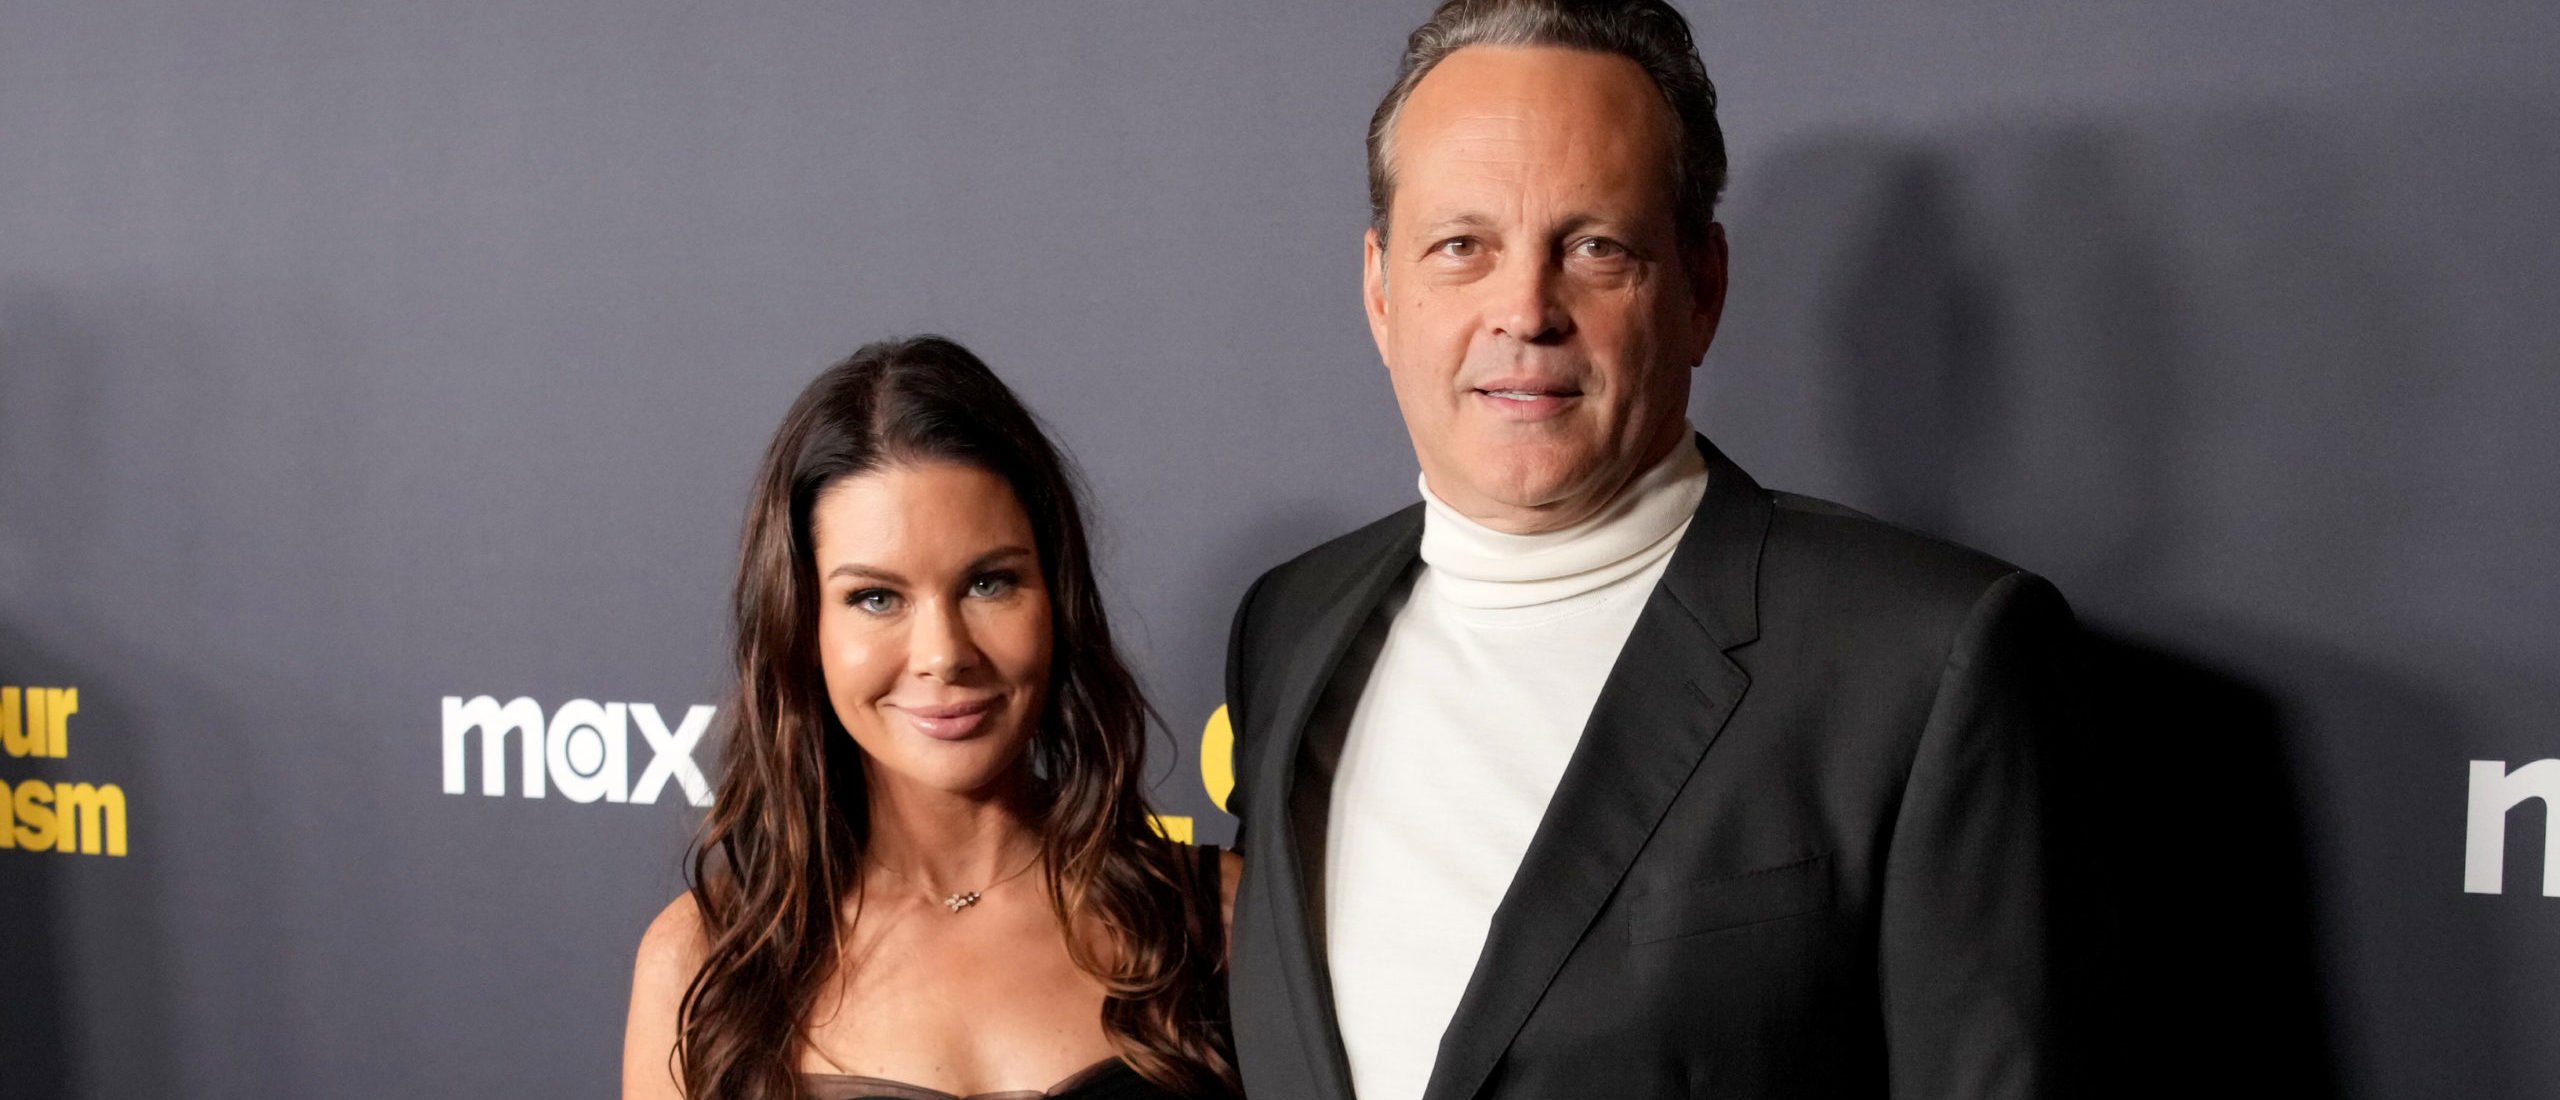 LOS ANGELES, CALIFORNIA - JANUARY 30: (L-R) Kyla Weber and Vince Vaughn attend the Curb Your Enthusiasm Season 12 premiere at DGA Theater Complex on January 30, 2024 in Los Angeles, California. (Photo by Jeff Kravitz/FilmMagic for HBO)